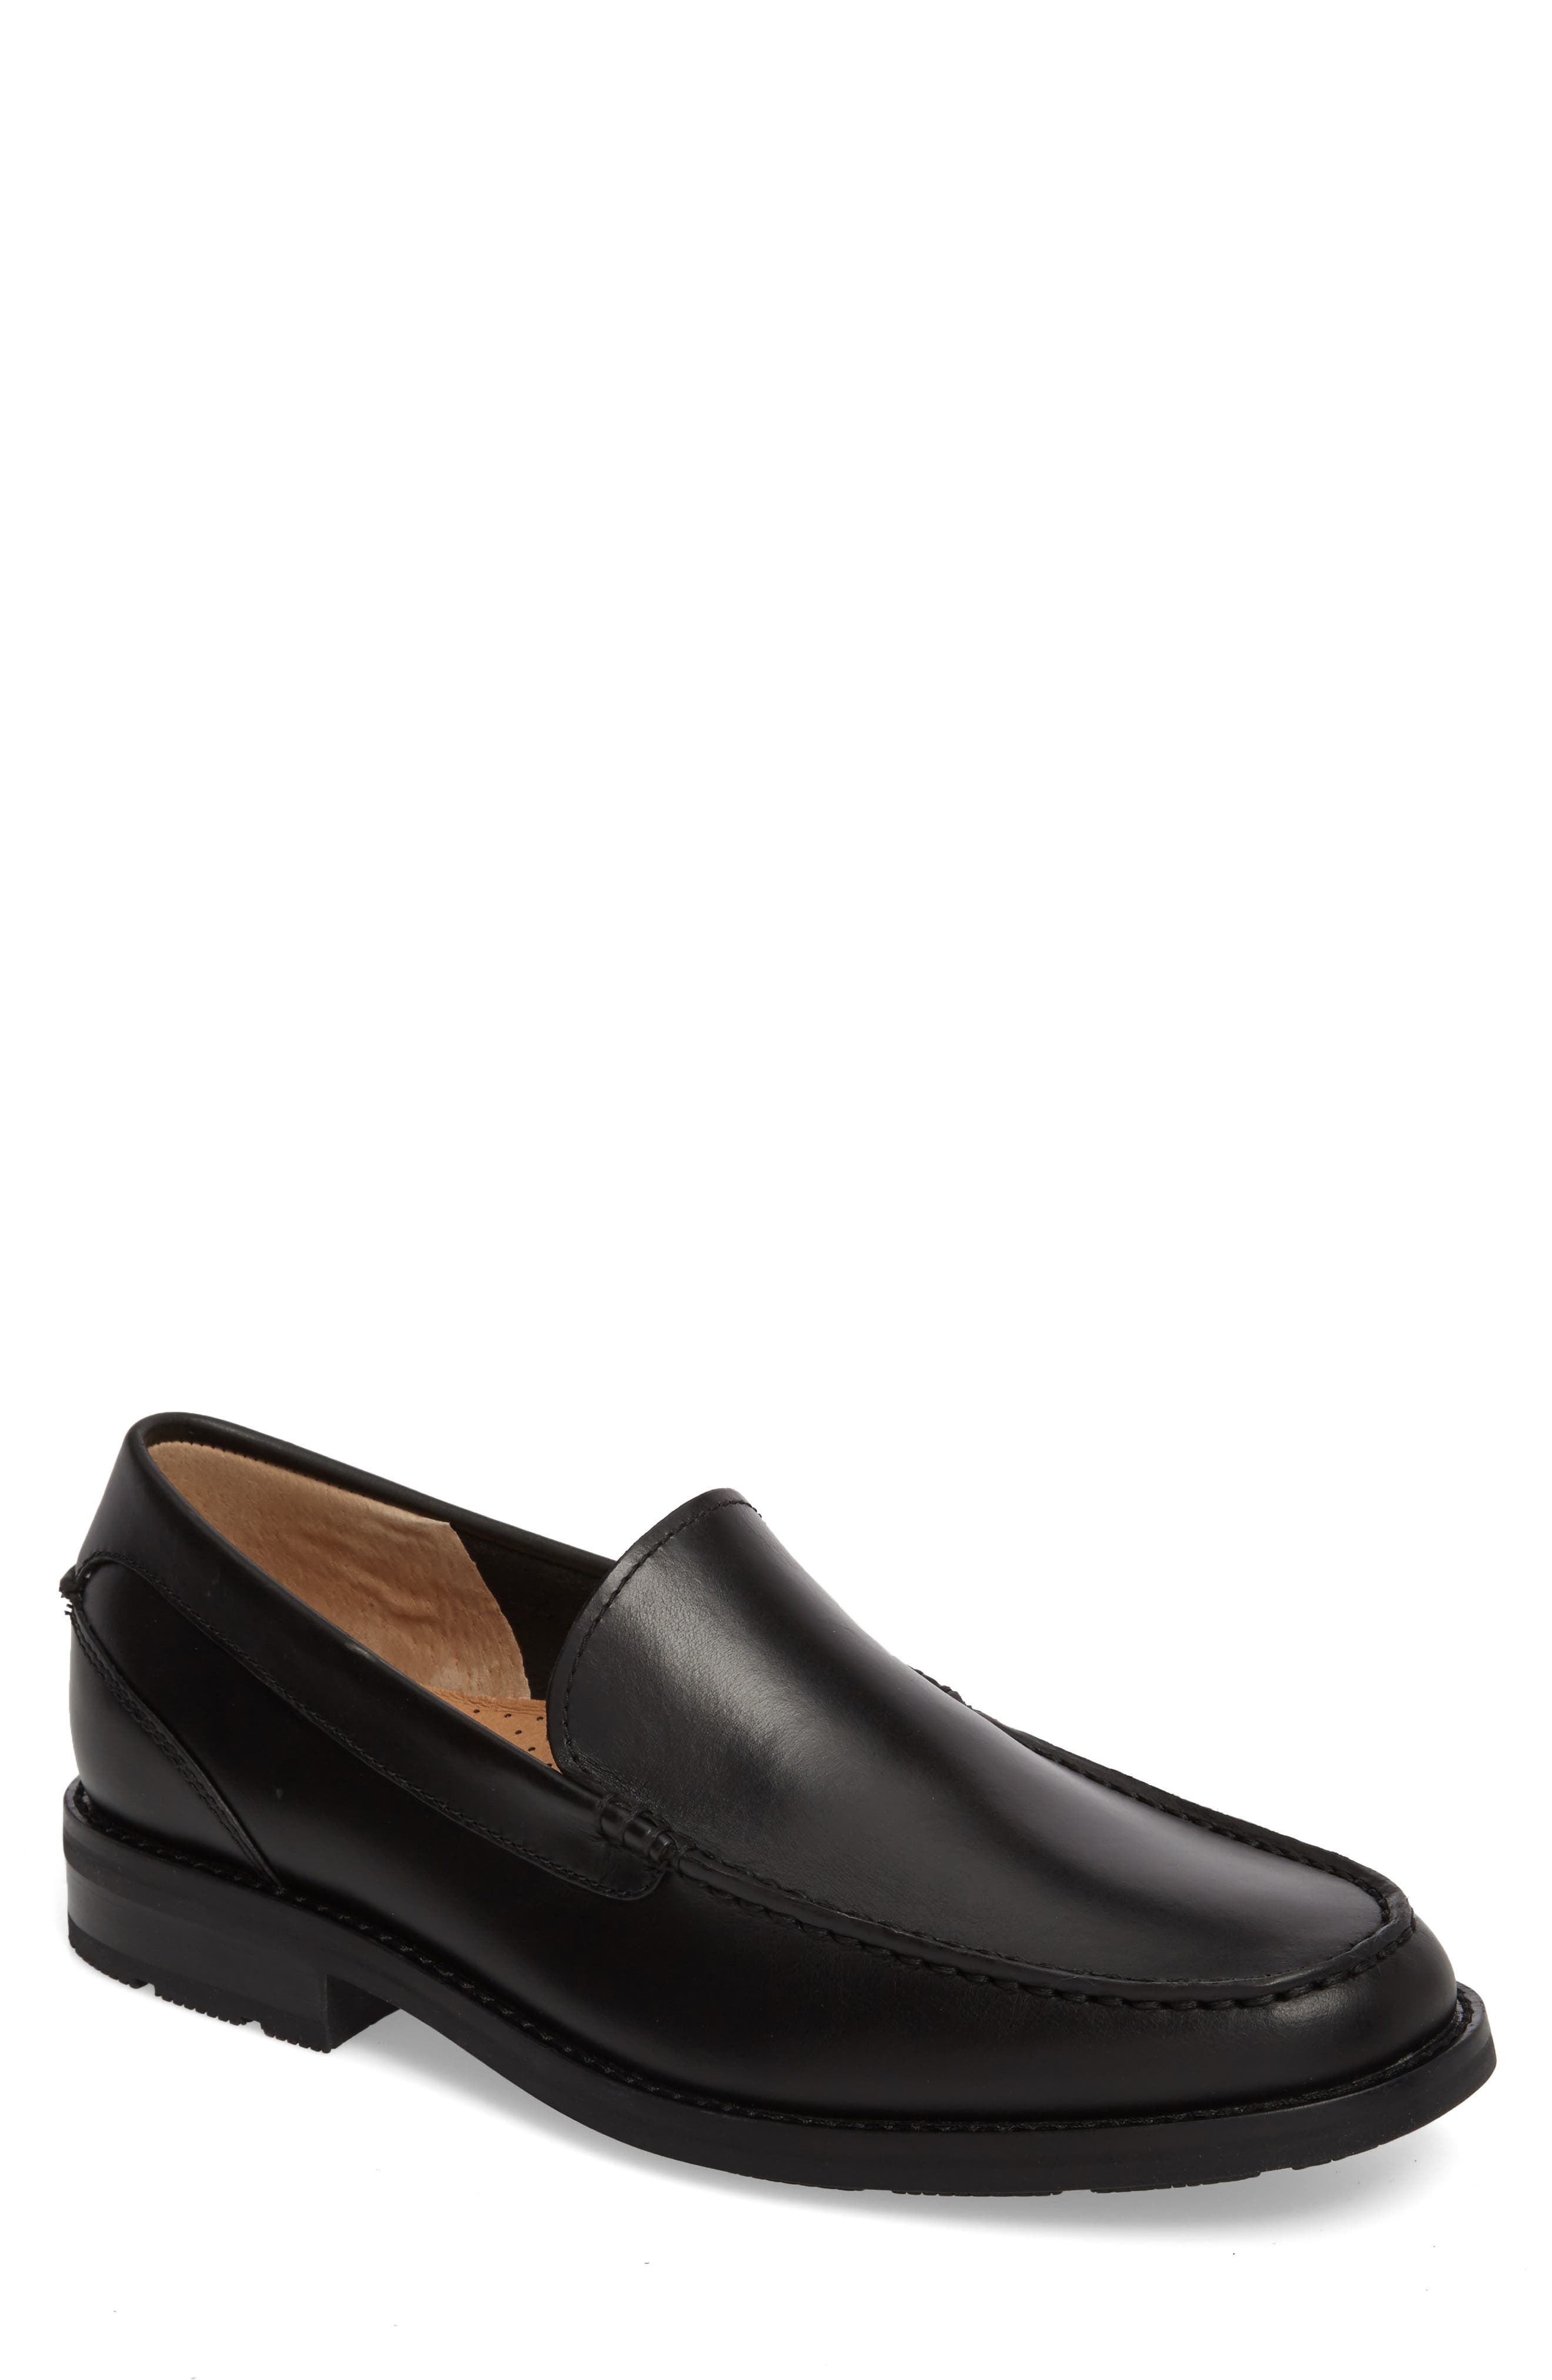 mens tan loafers sale